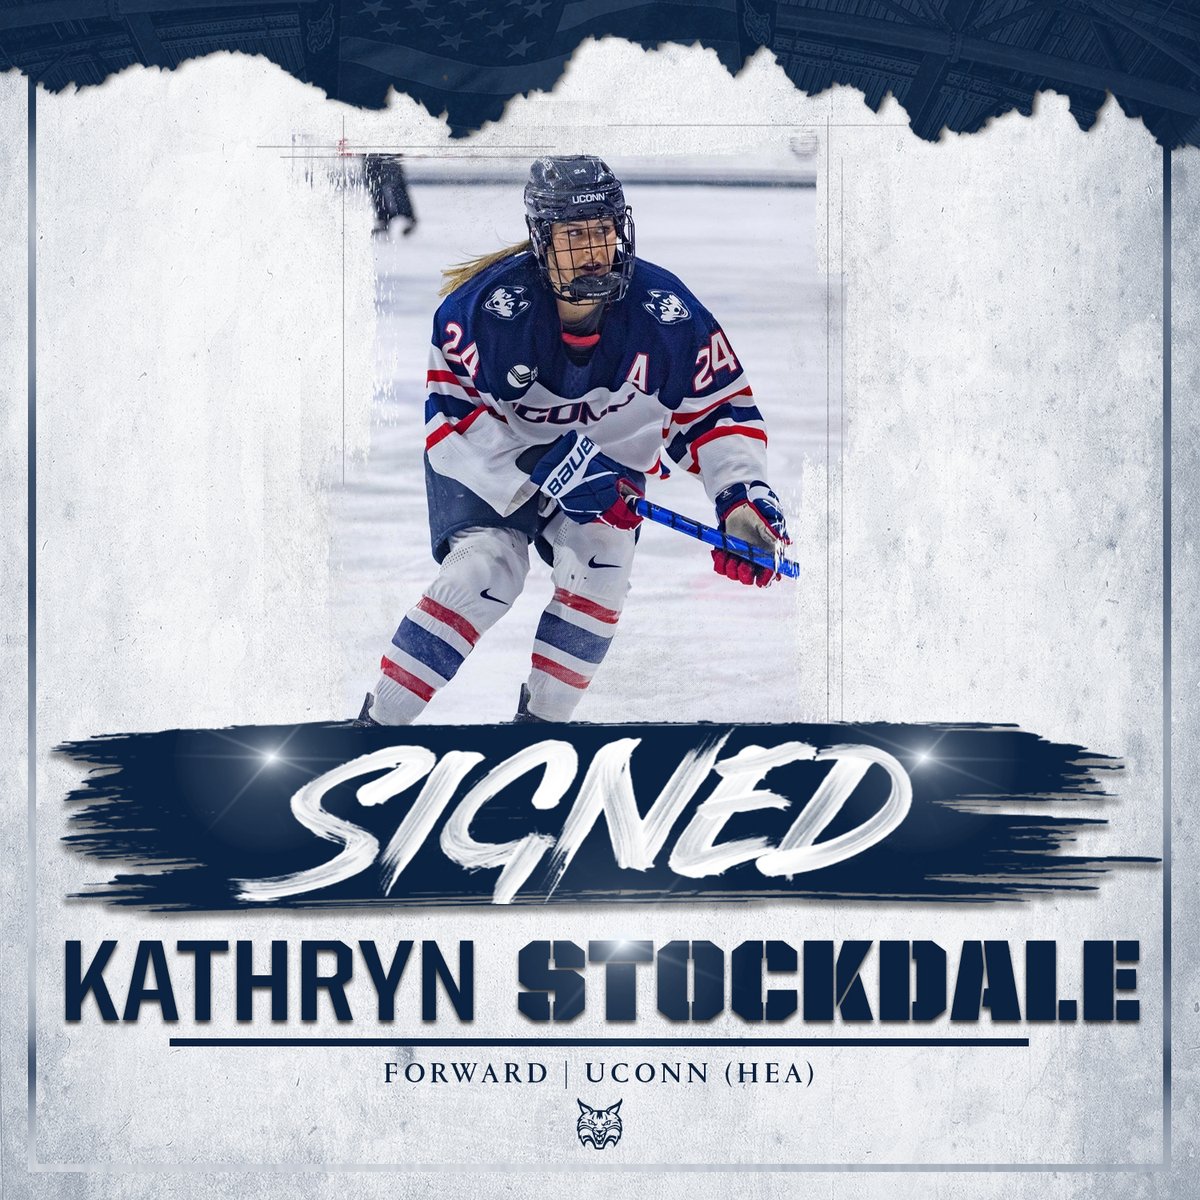 𝐒𝐈𝐆𝐍𝐄𝐃 - Kathryn Stockdale The Hockey East Championship game overtime hero comes to Hamden after also earning 2023-24 Best Defensive Forward honors! #BobcatNation x #NCAAHockey